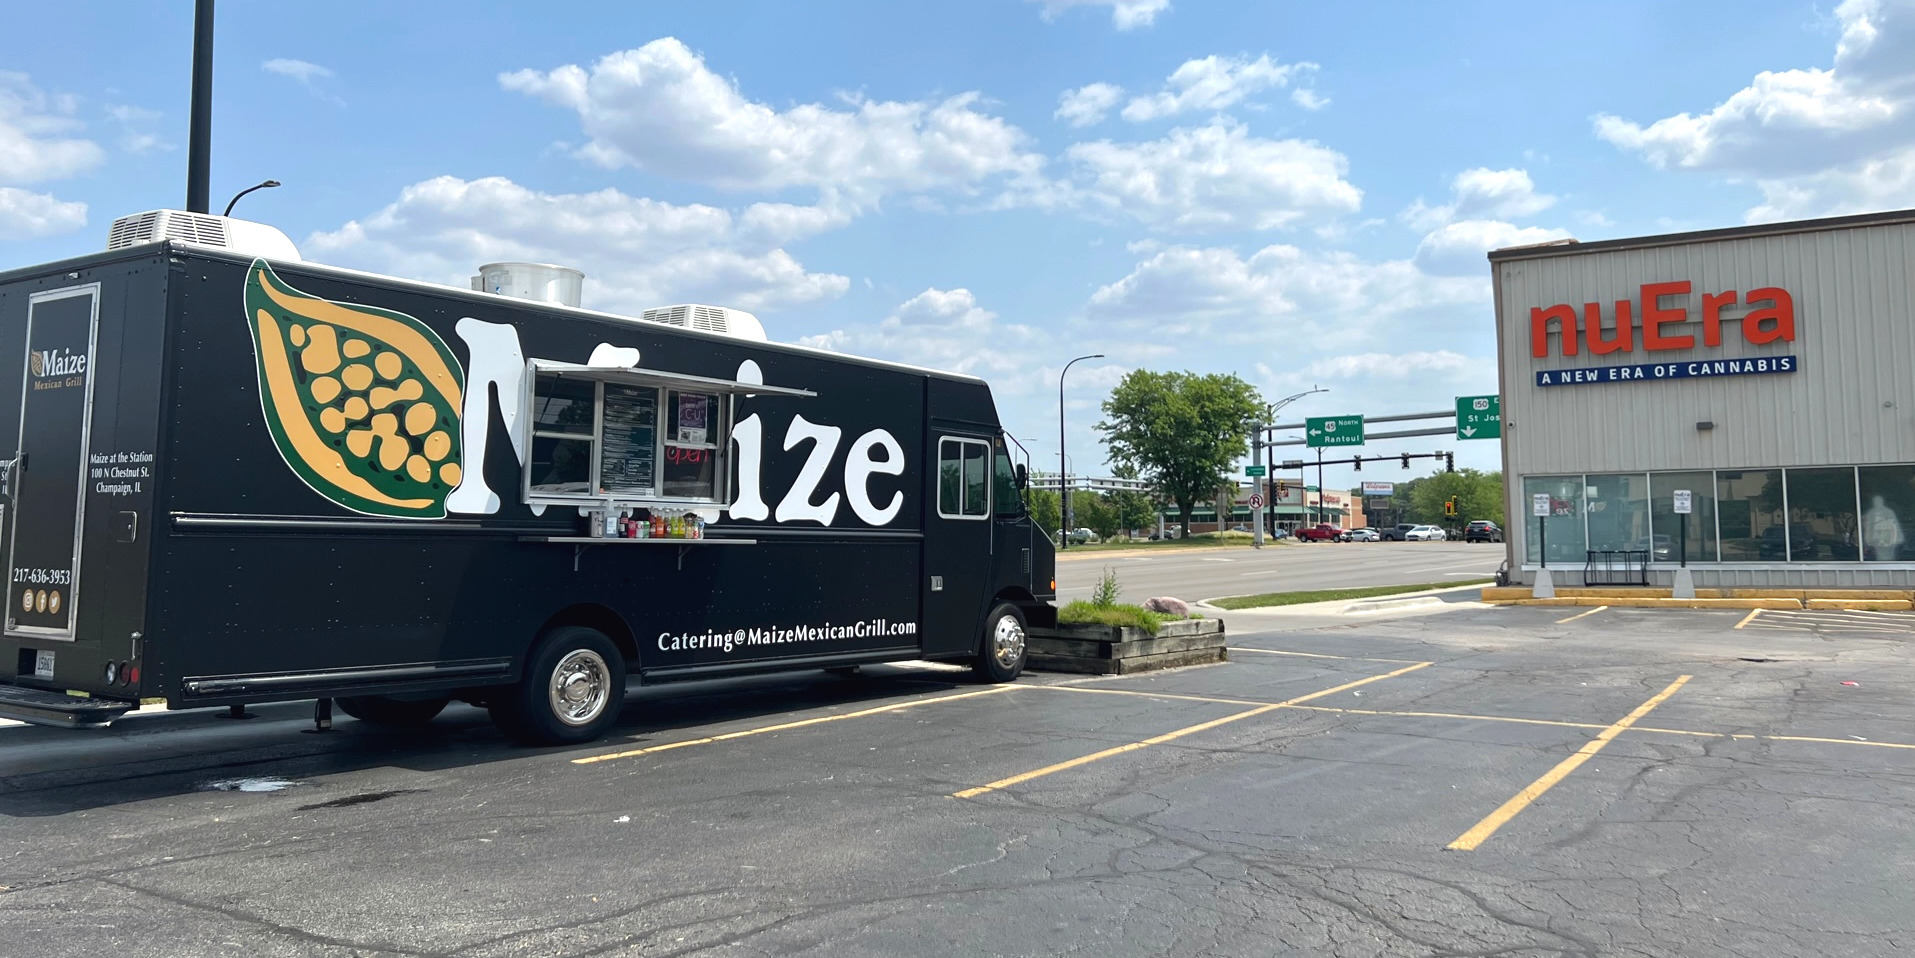 The Maize taco truck is parked in the nuEra Urbana parking lot in Champaign-Urbana, Illinois. Photo by Alyssa Buckley.